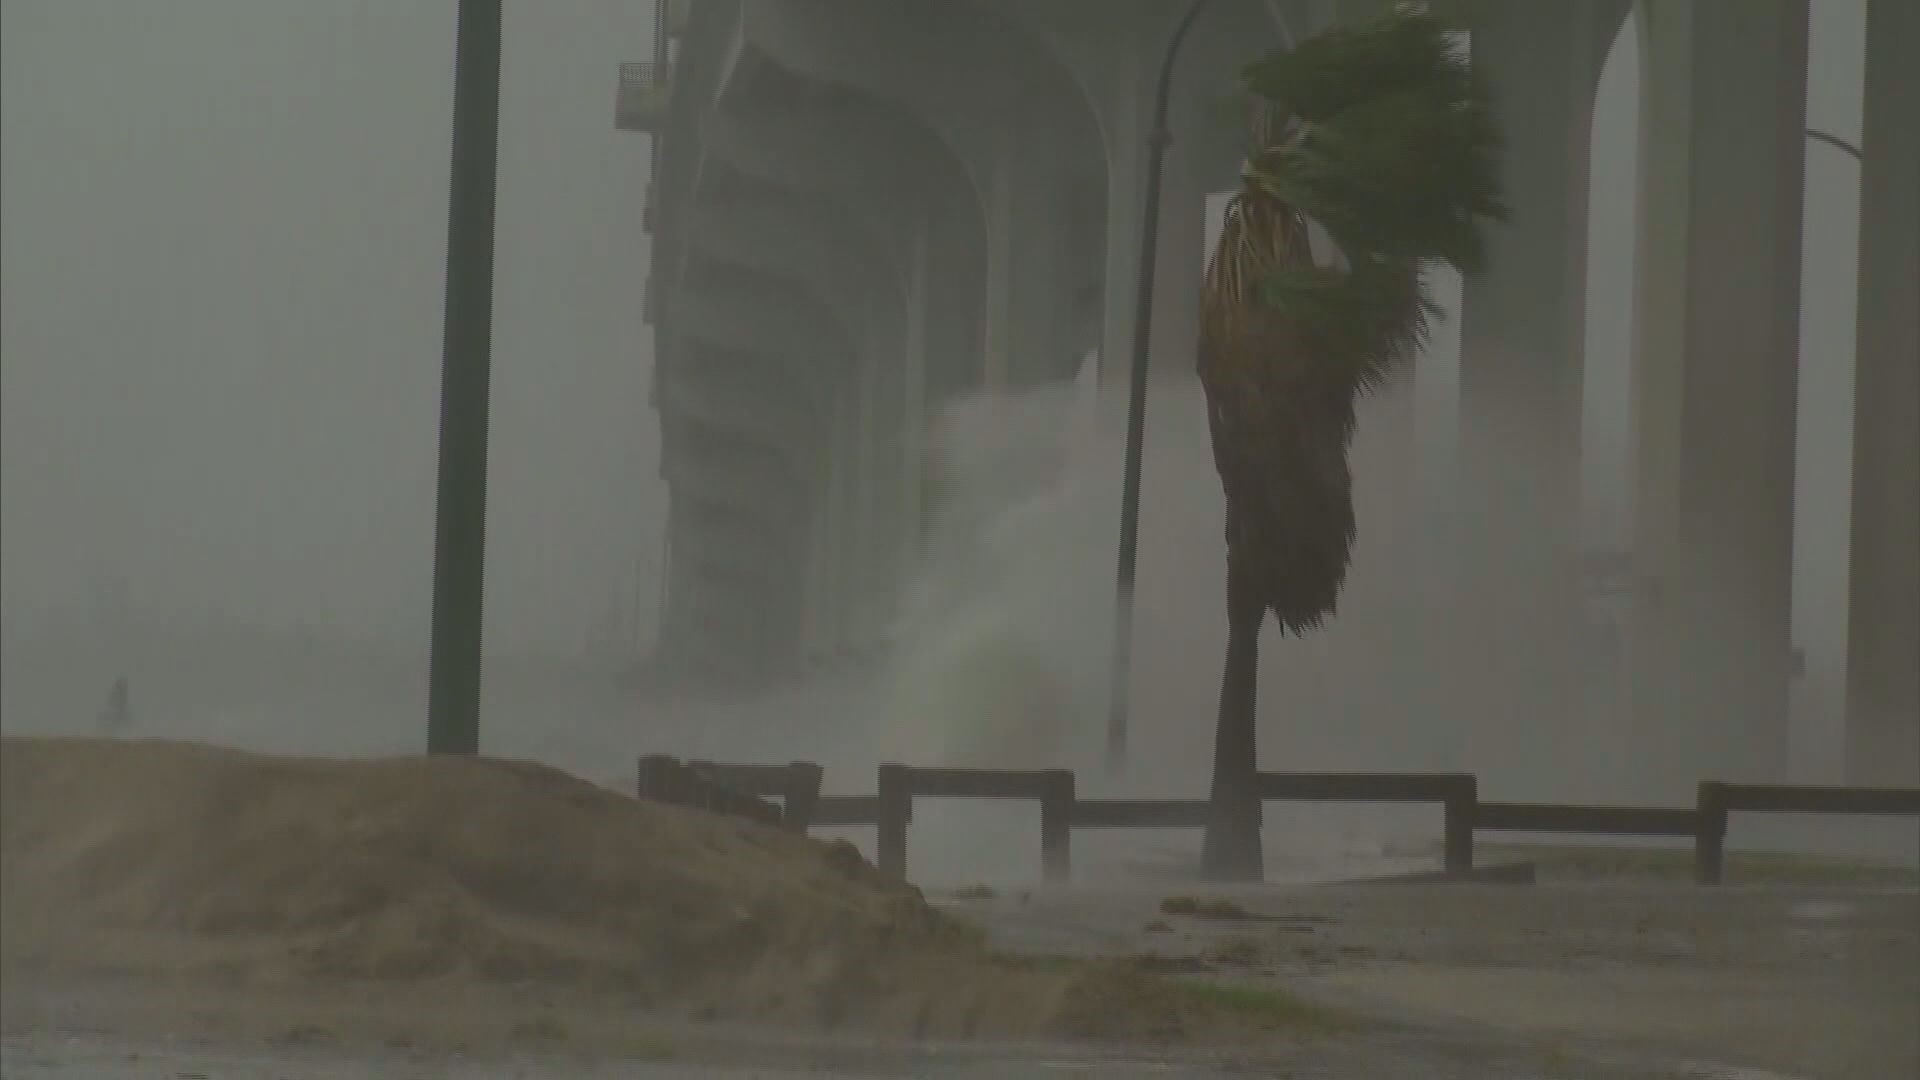 200 hotels in Florida say they could provide shelter during hurricane season.